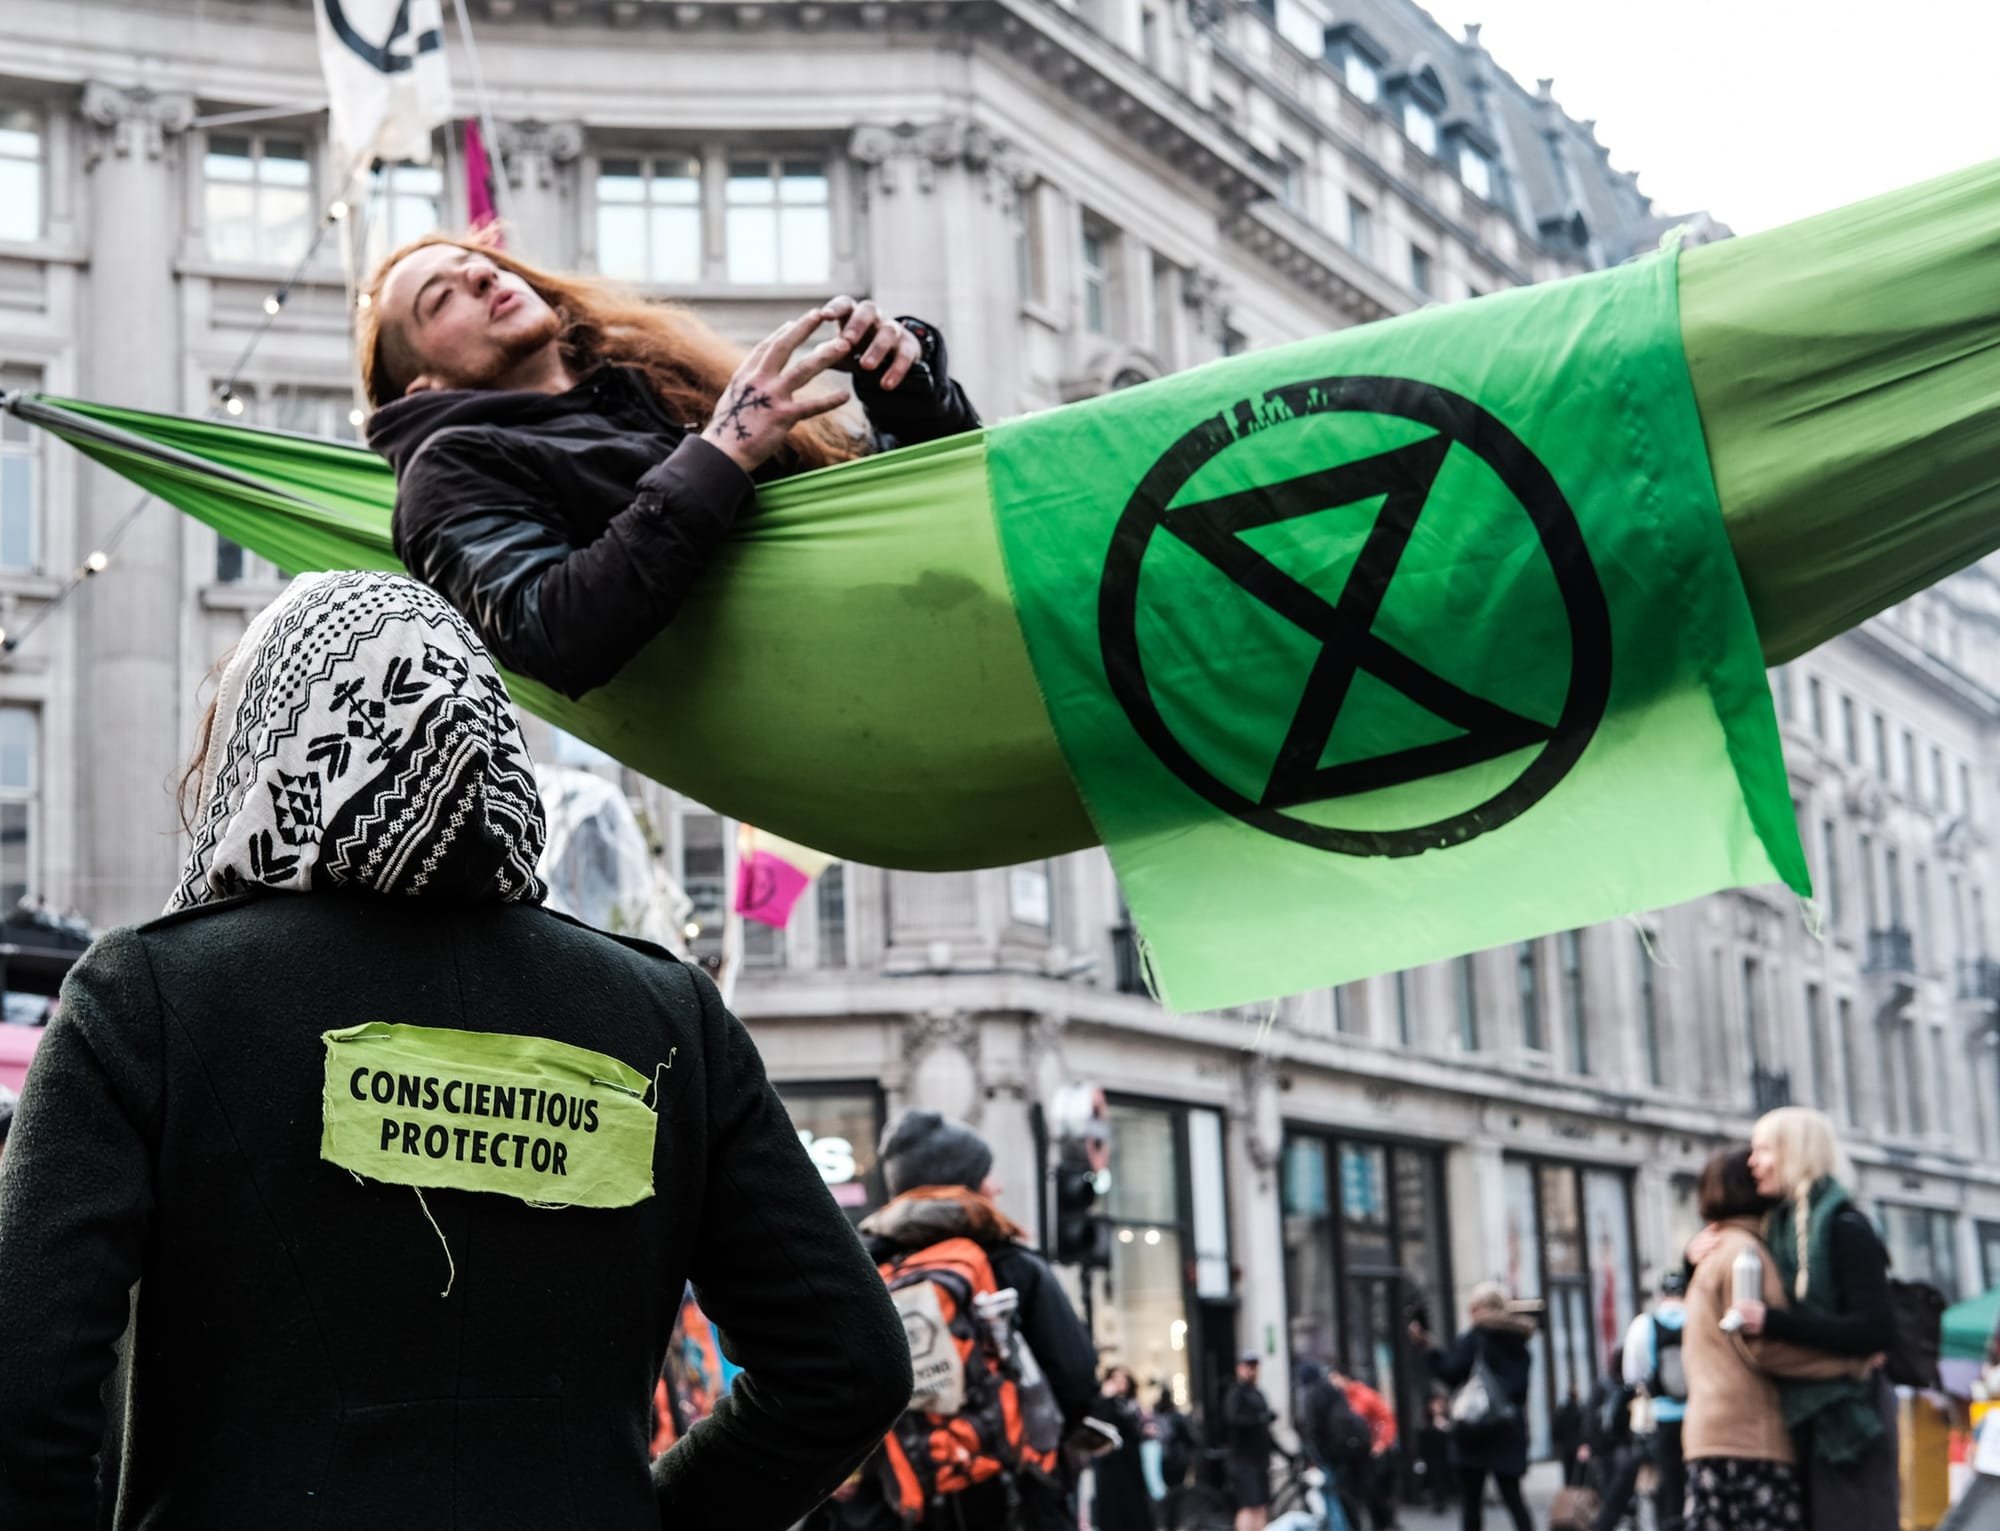 Real Greens V Fake Greens An Investigation Into The Green Movement New Chartist Movement 